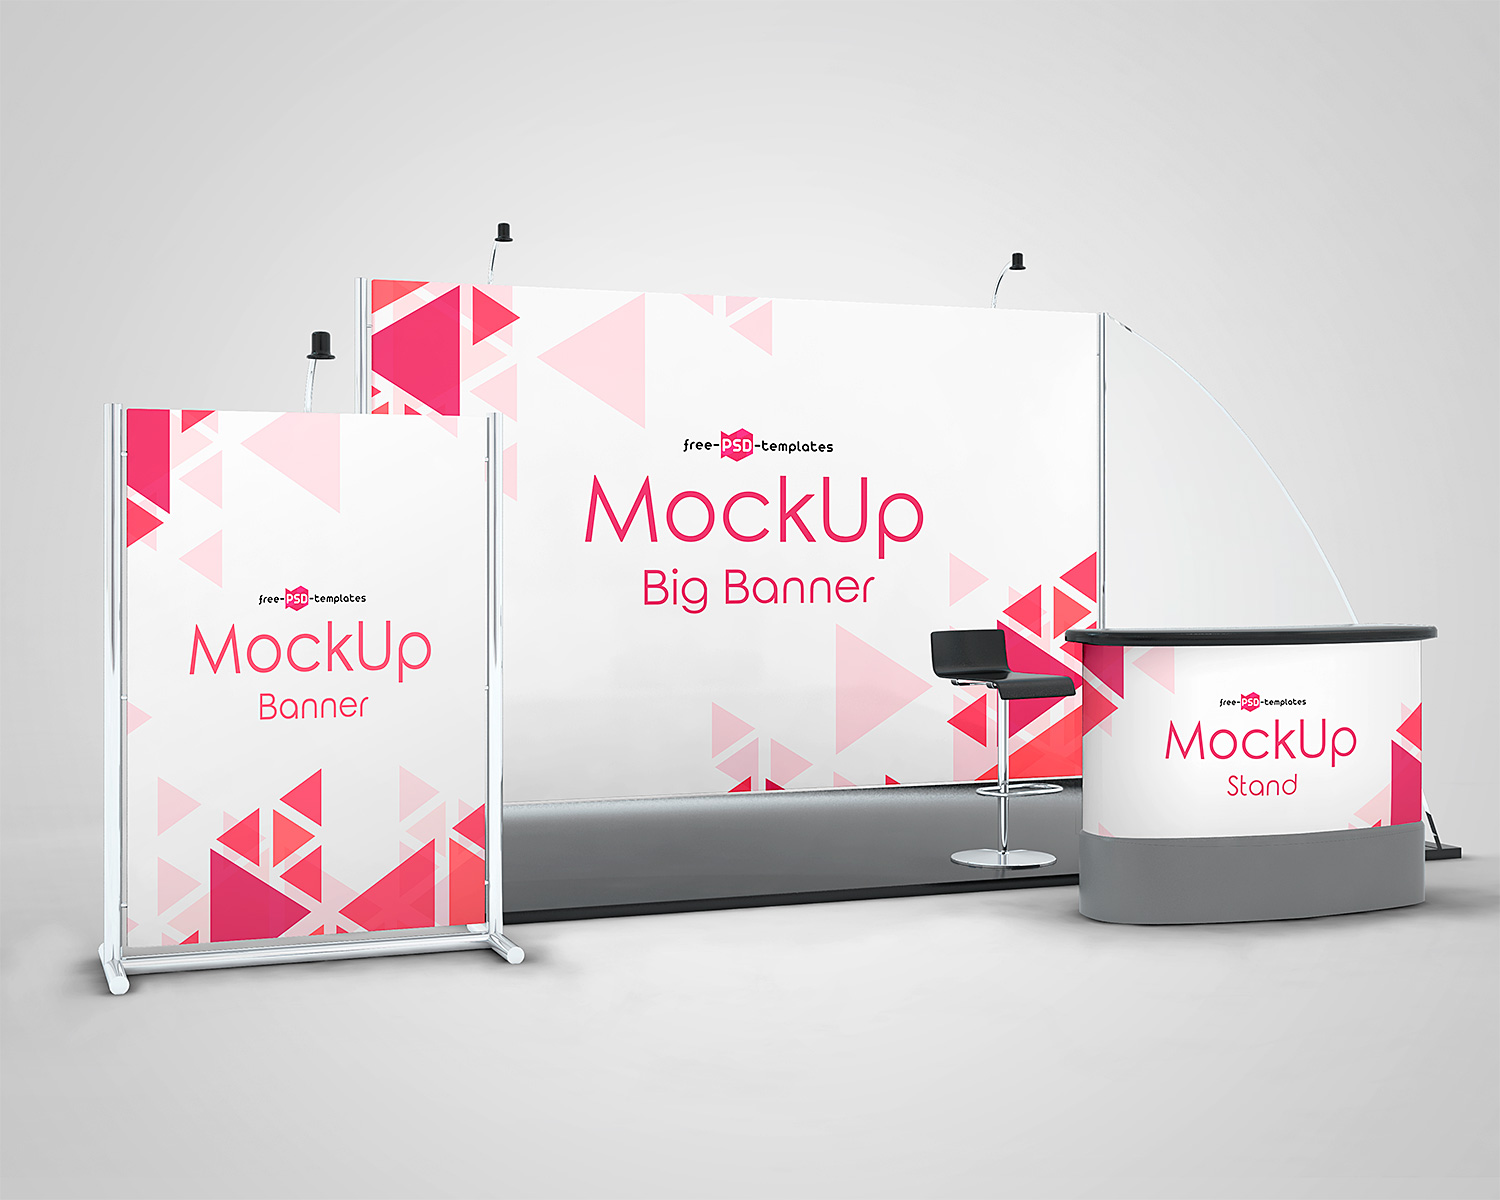 Trade show booth mockup psd free download